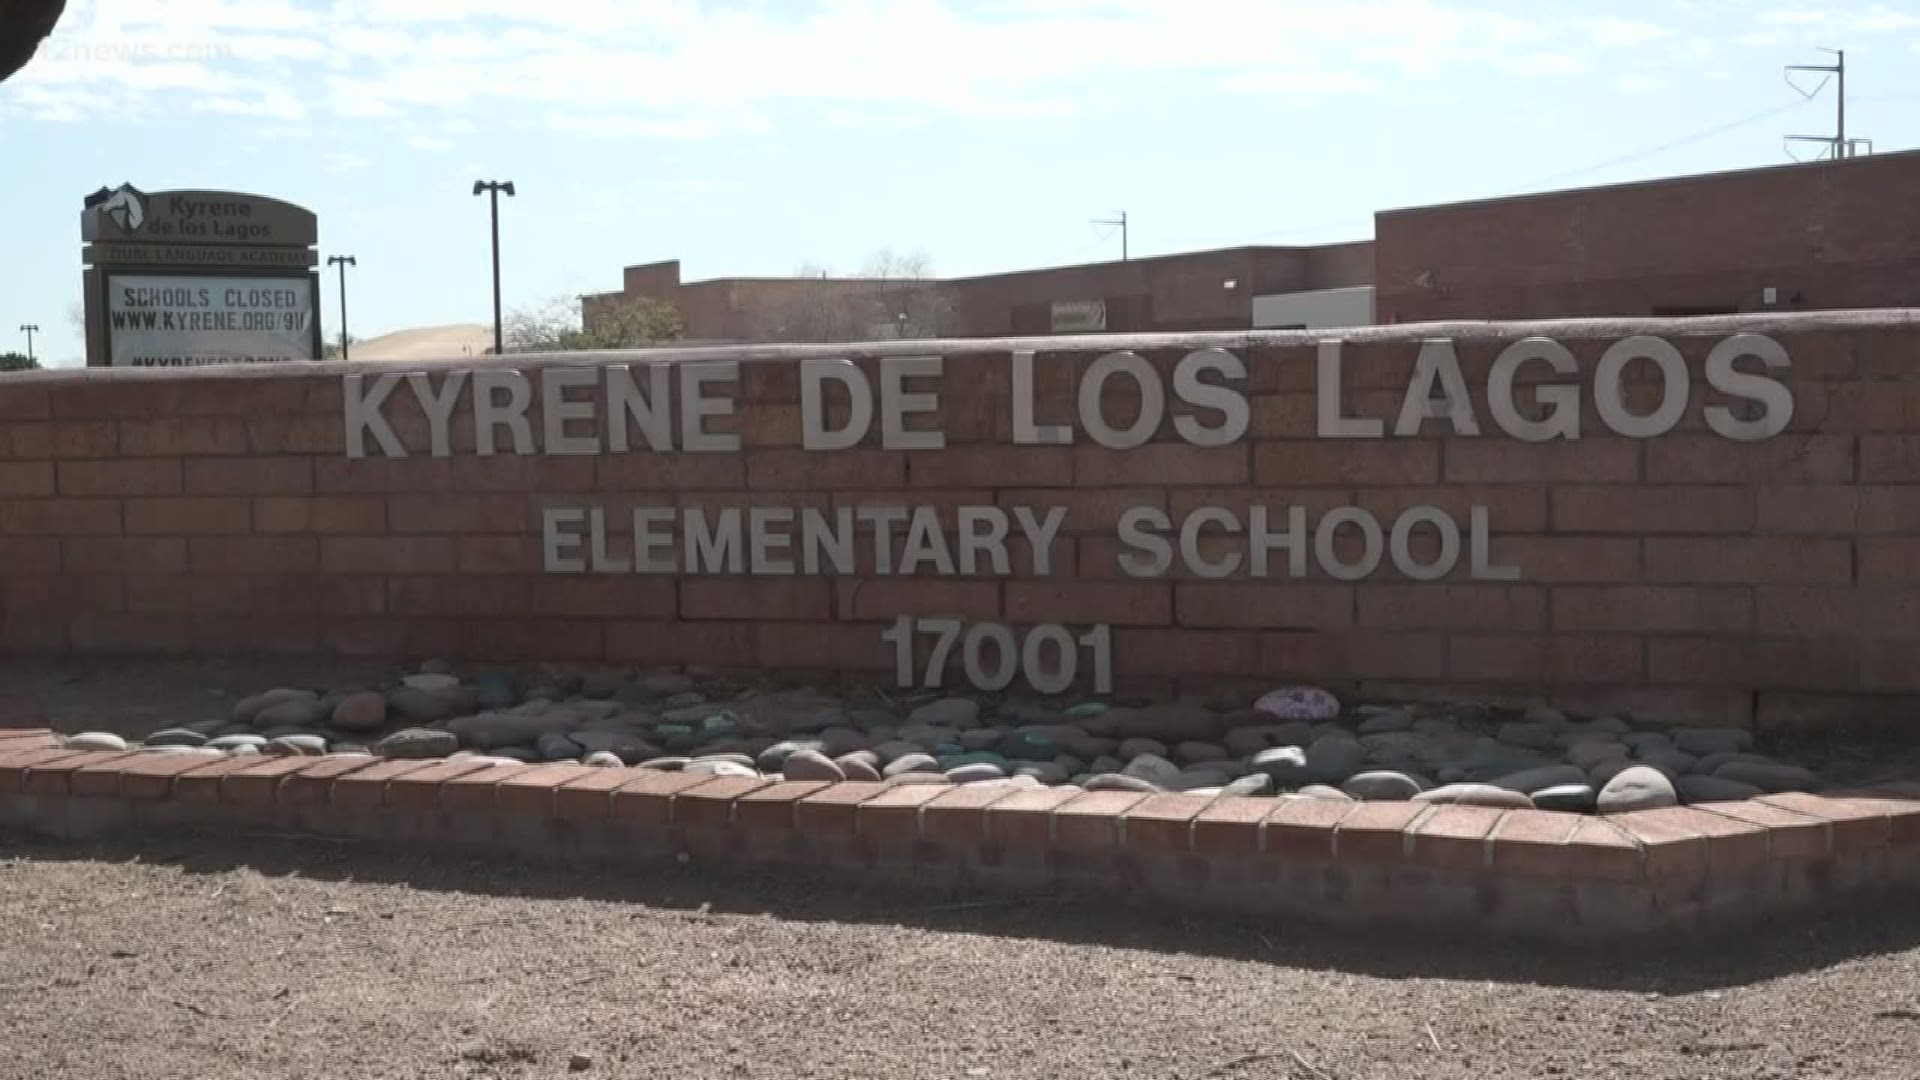 All Arizona schools are closed through April 10, 2020 to try and slow the spread of coronavirus. One Valley school district is preparing for the long-haul.